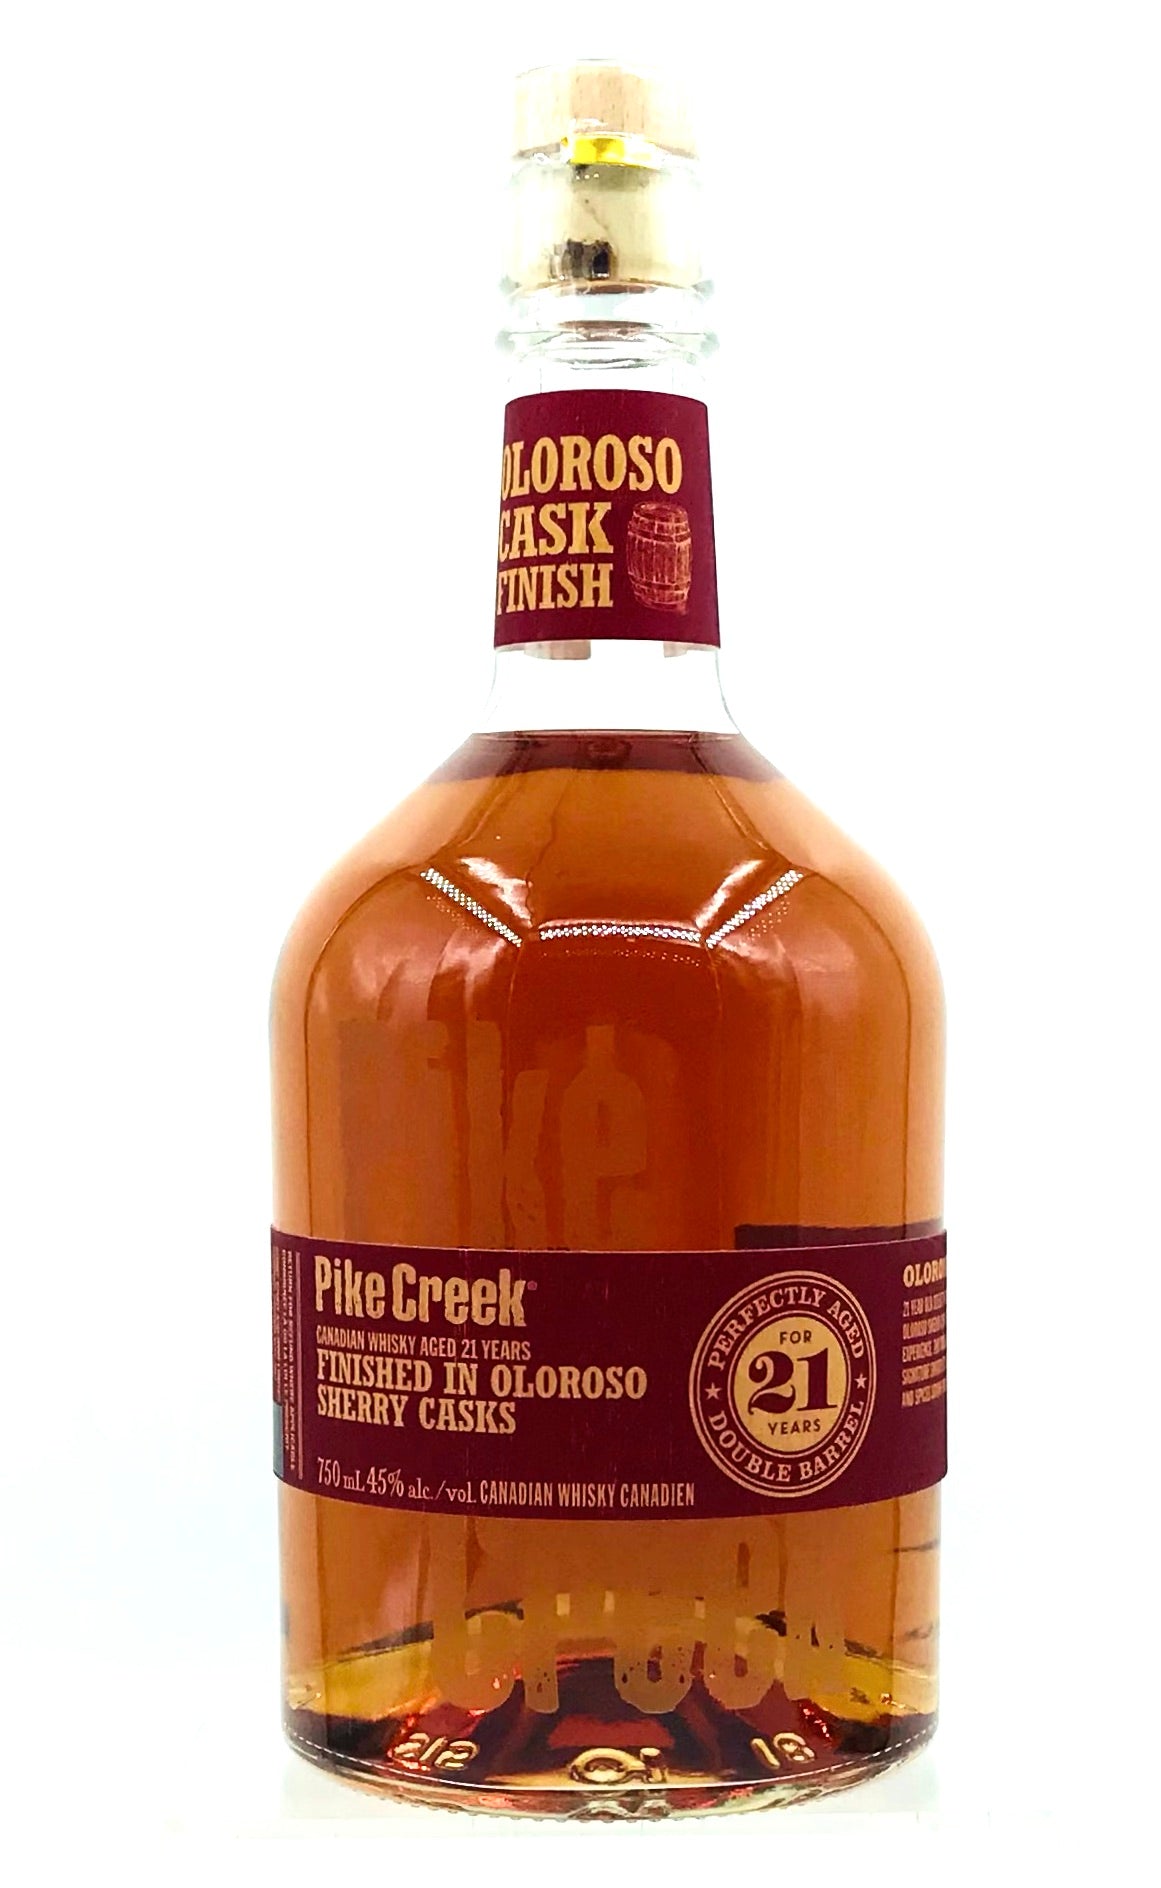 Pike Creek Olorosso Sherry Cask 21 Year Old Canadian Whisky